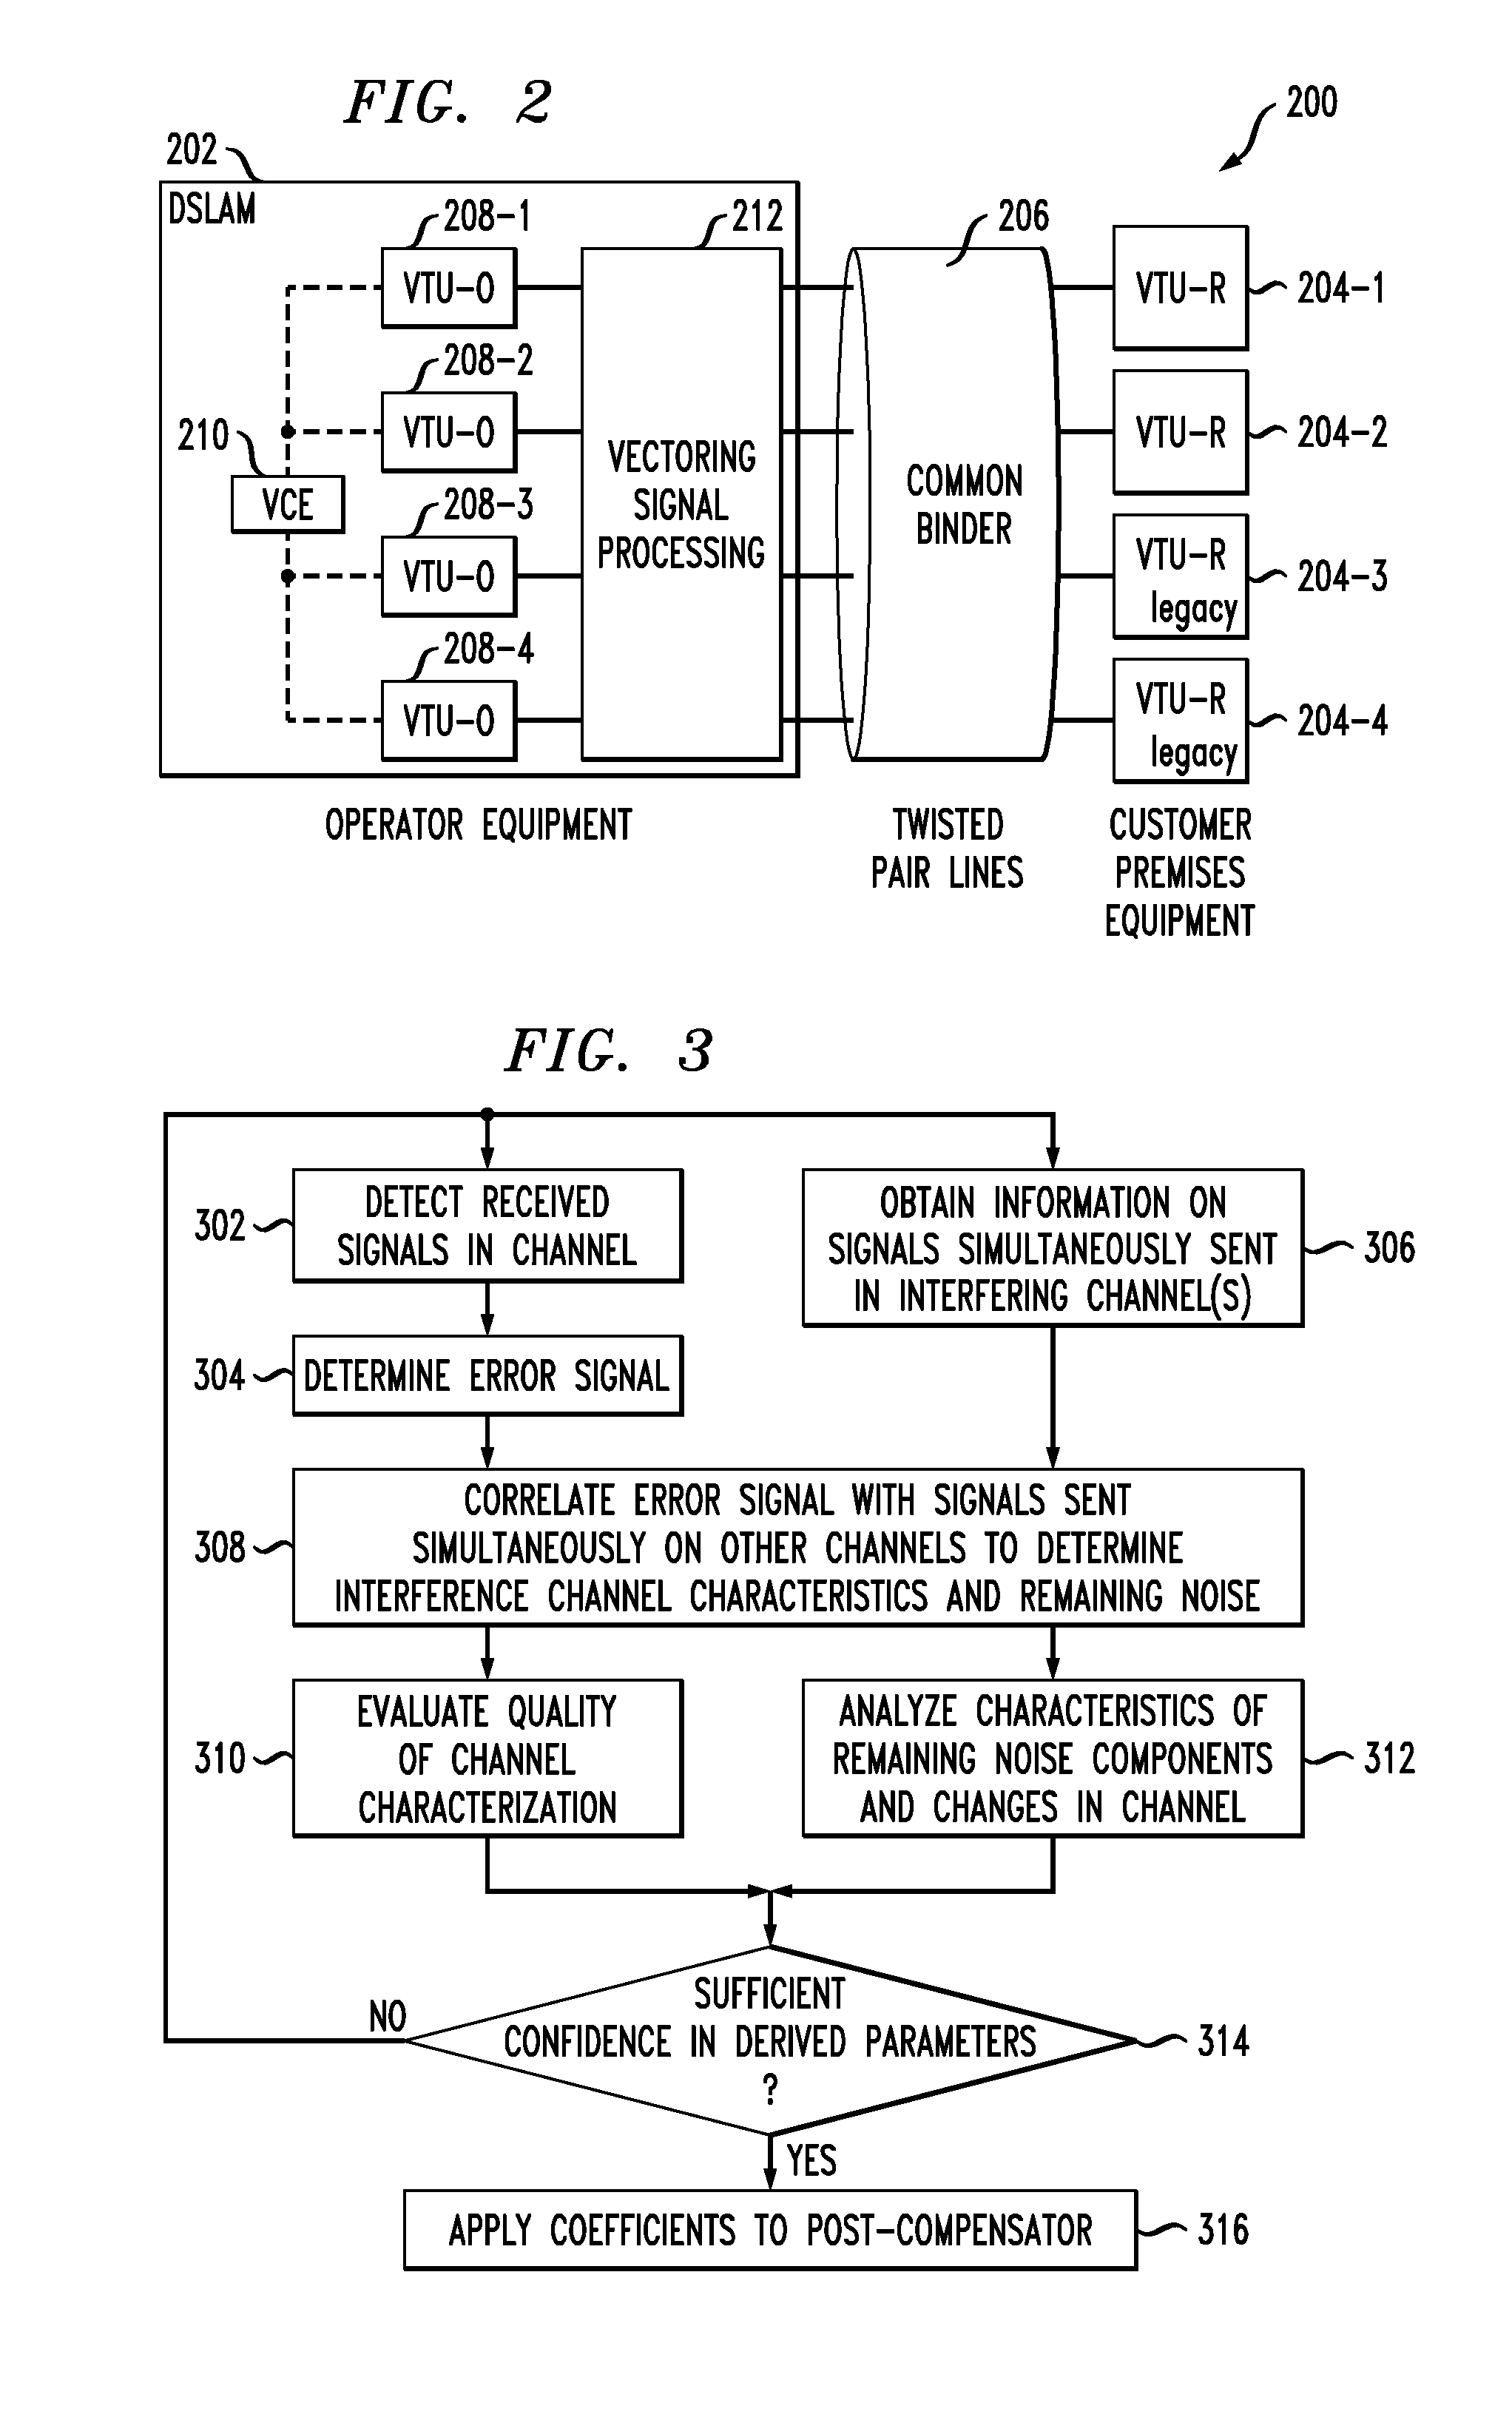 Channel estimation utilizing control signals transmitted by an activating line during initialization